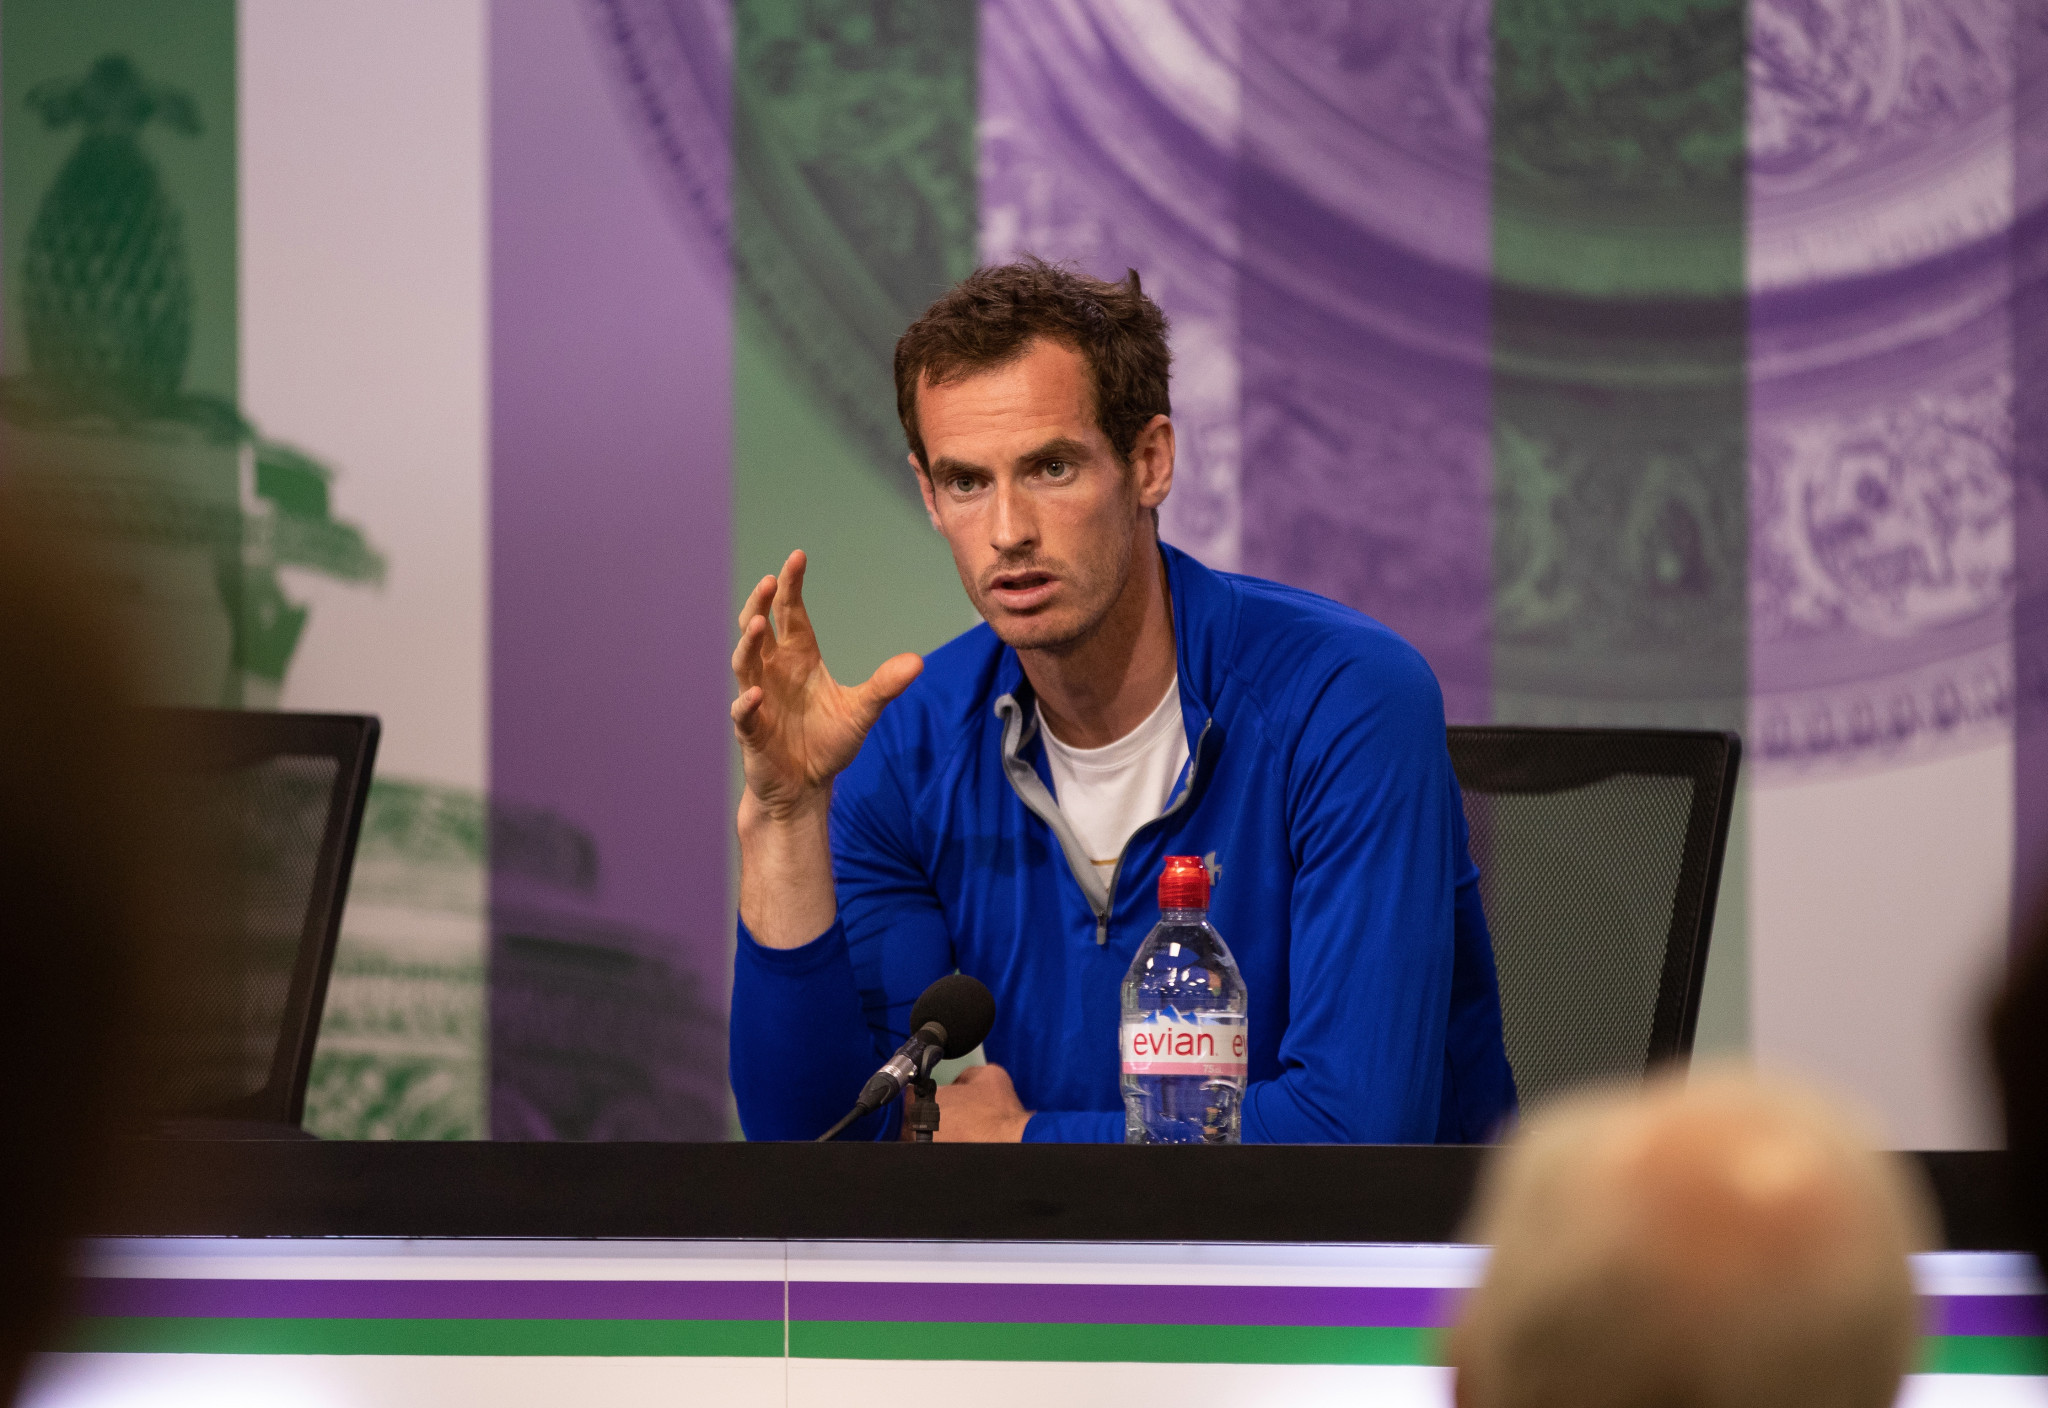 Andy Murray reminded a journalist about the women's game after losing his Wimbledon title in 2017 ©Getty Images
